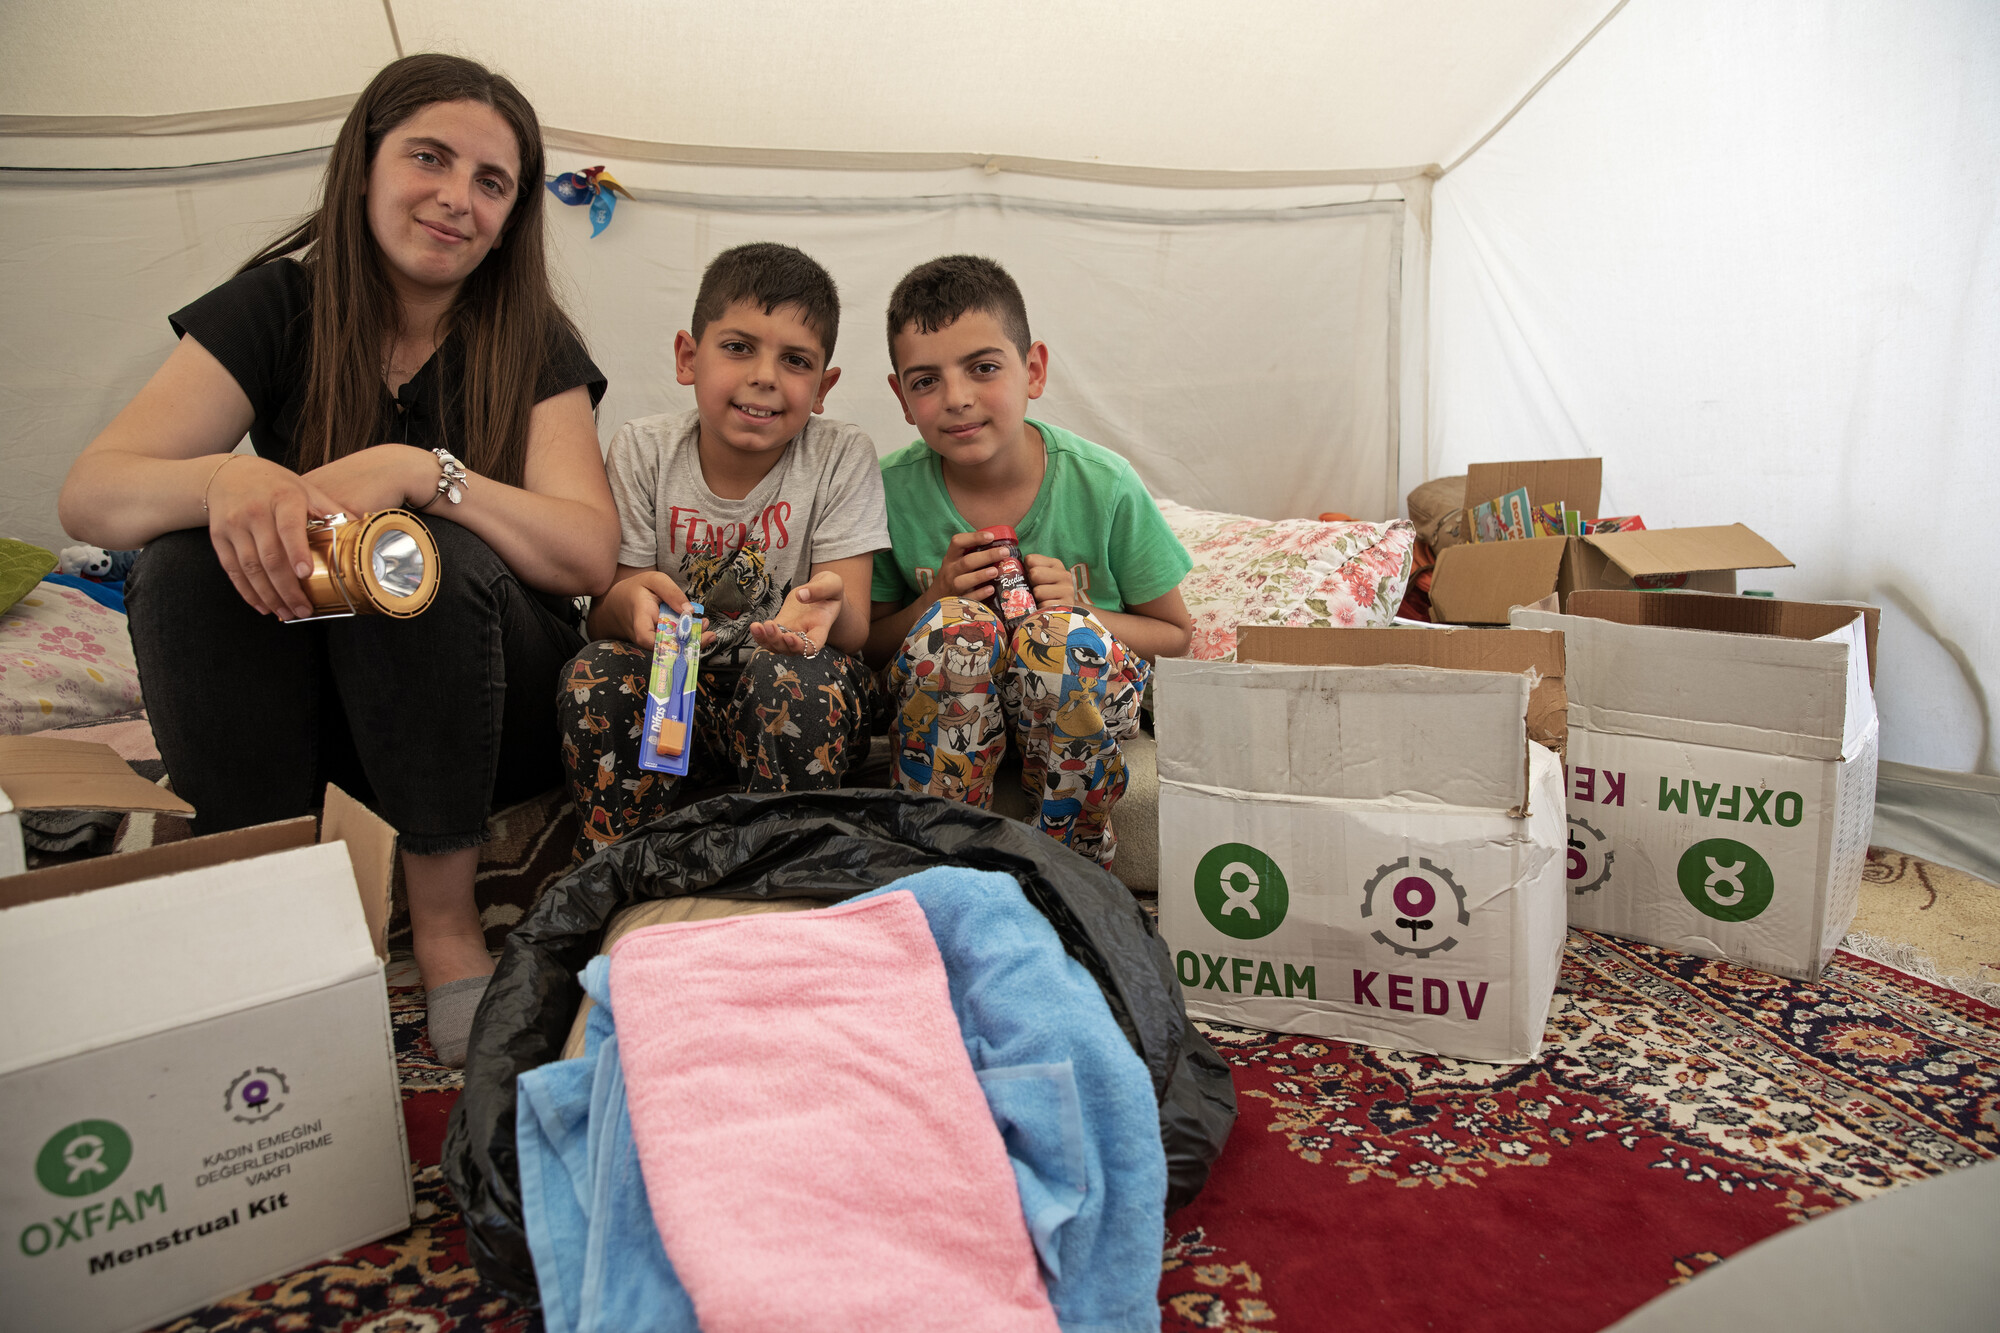 Mother and her two young sons are sitting in their tent. Surrounded by boxes of materials provided by Oxfam and KEDV. They are smiling and seem happy and grateful to have made it to a safe area. The little family is hugging and playing around while unboxing the supplies and goods boxes.